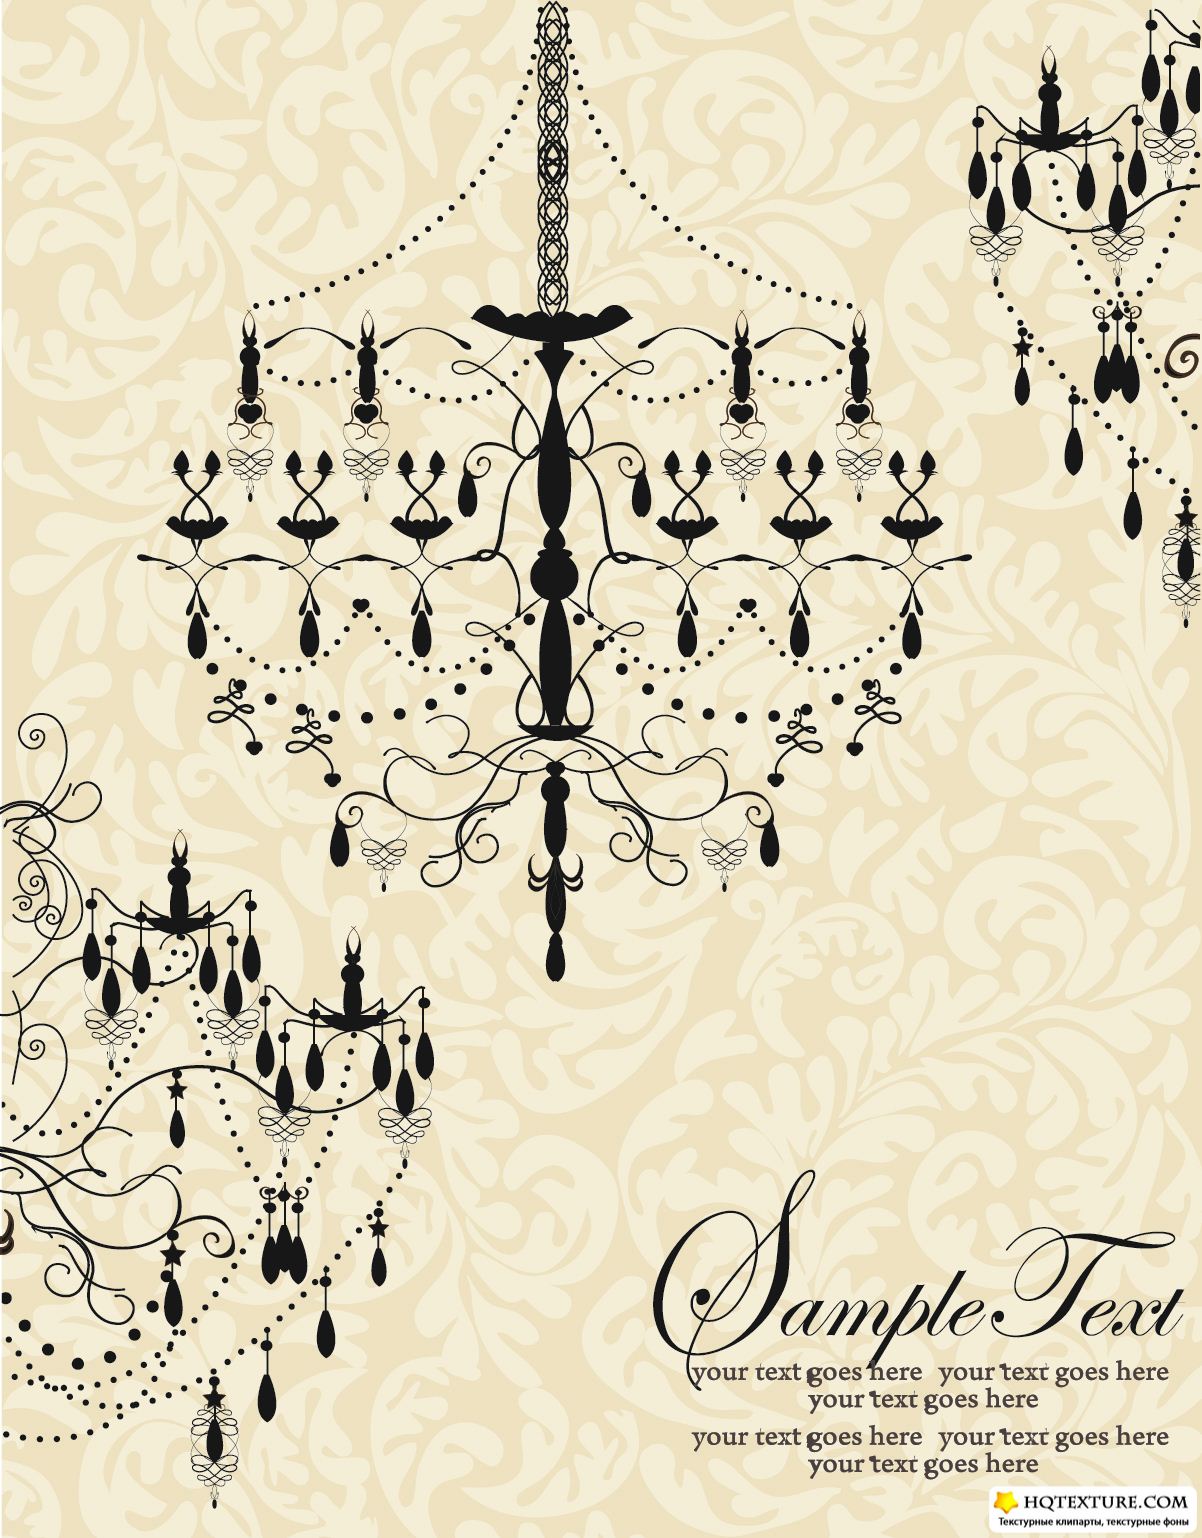 Vintage Background With Chandelier